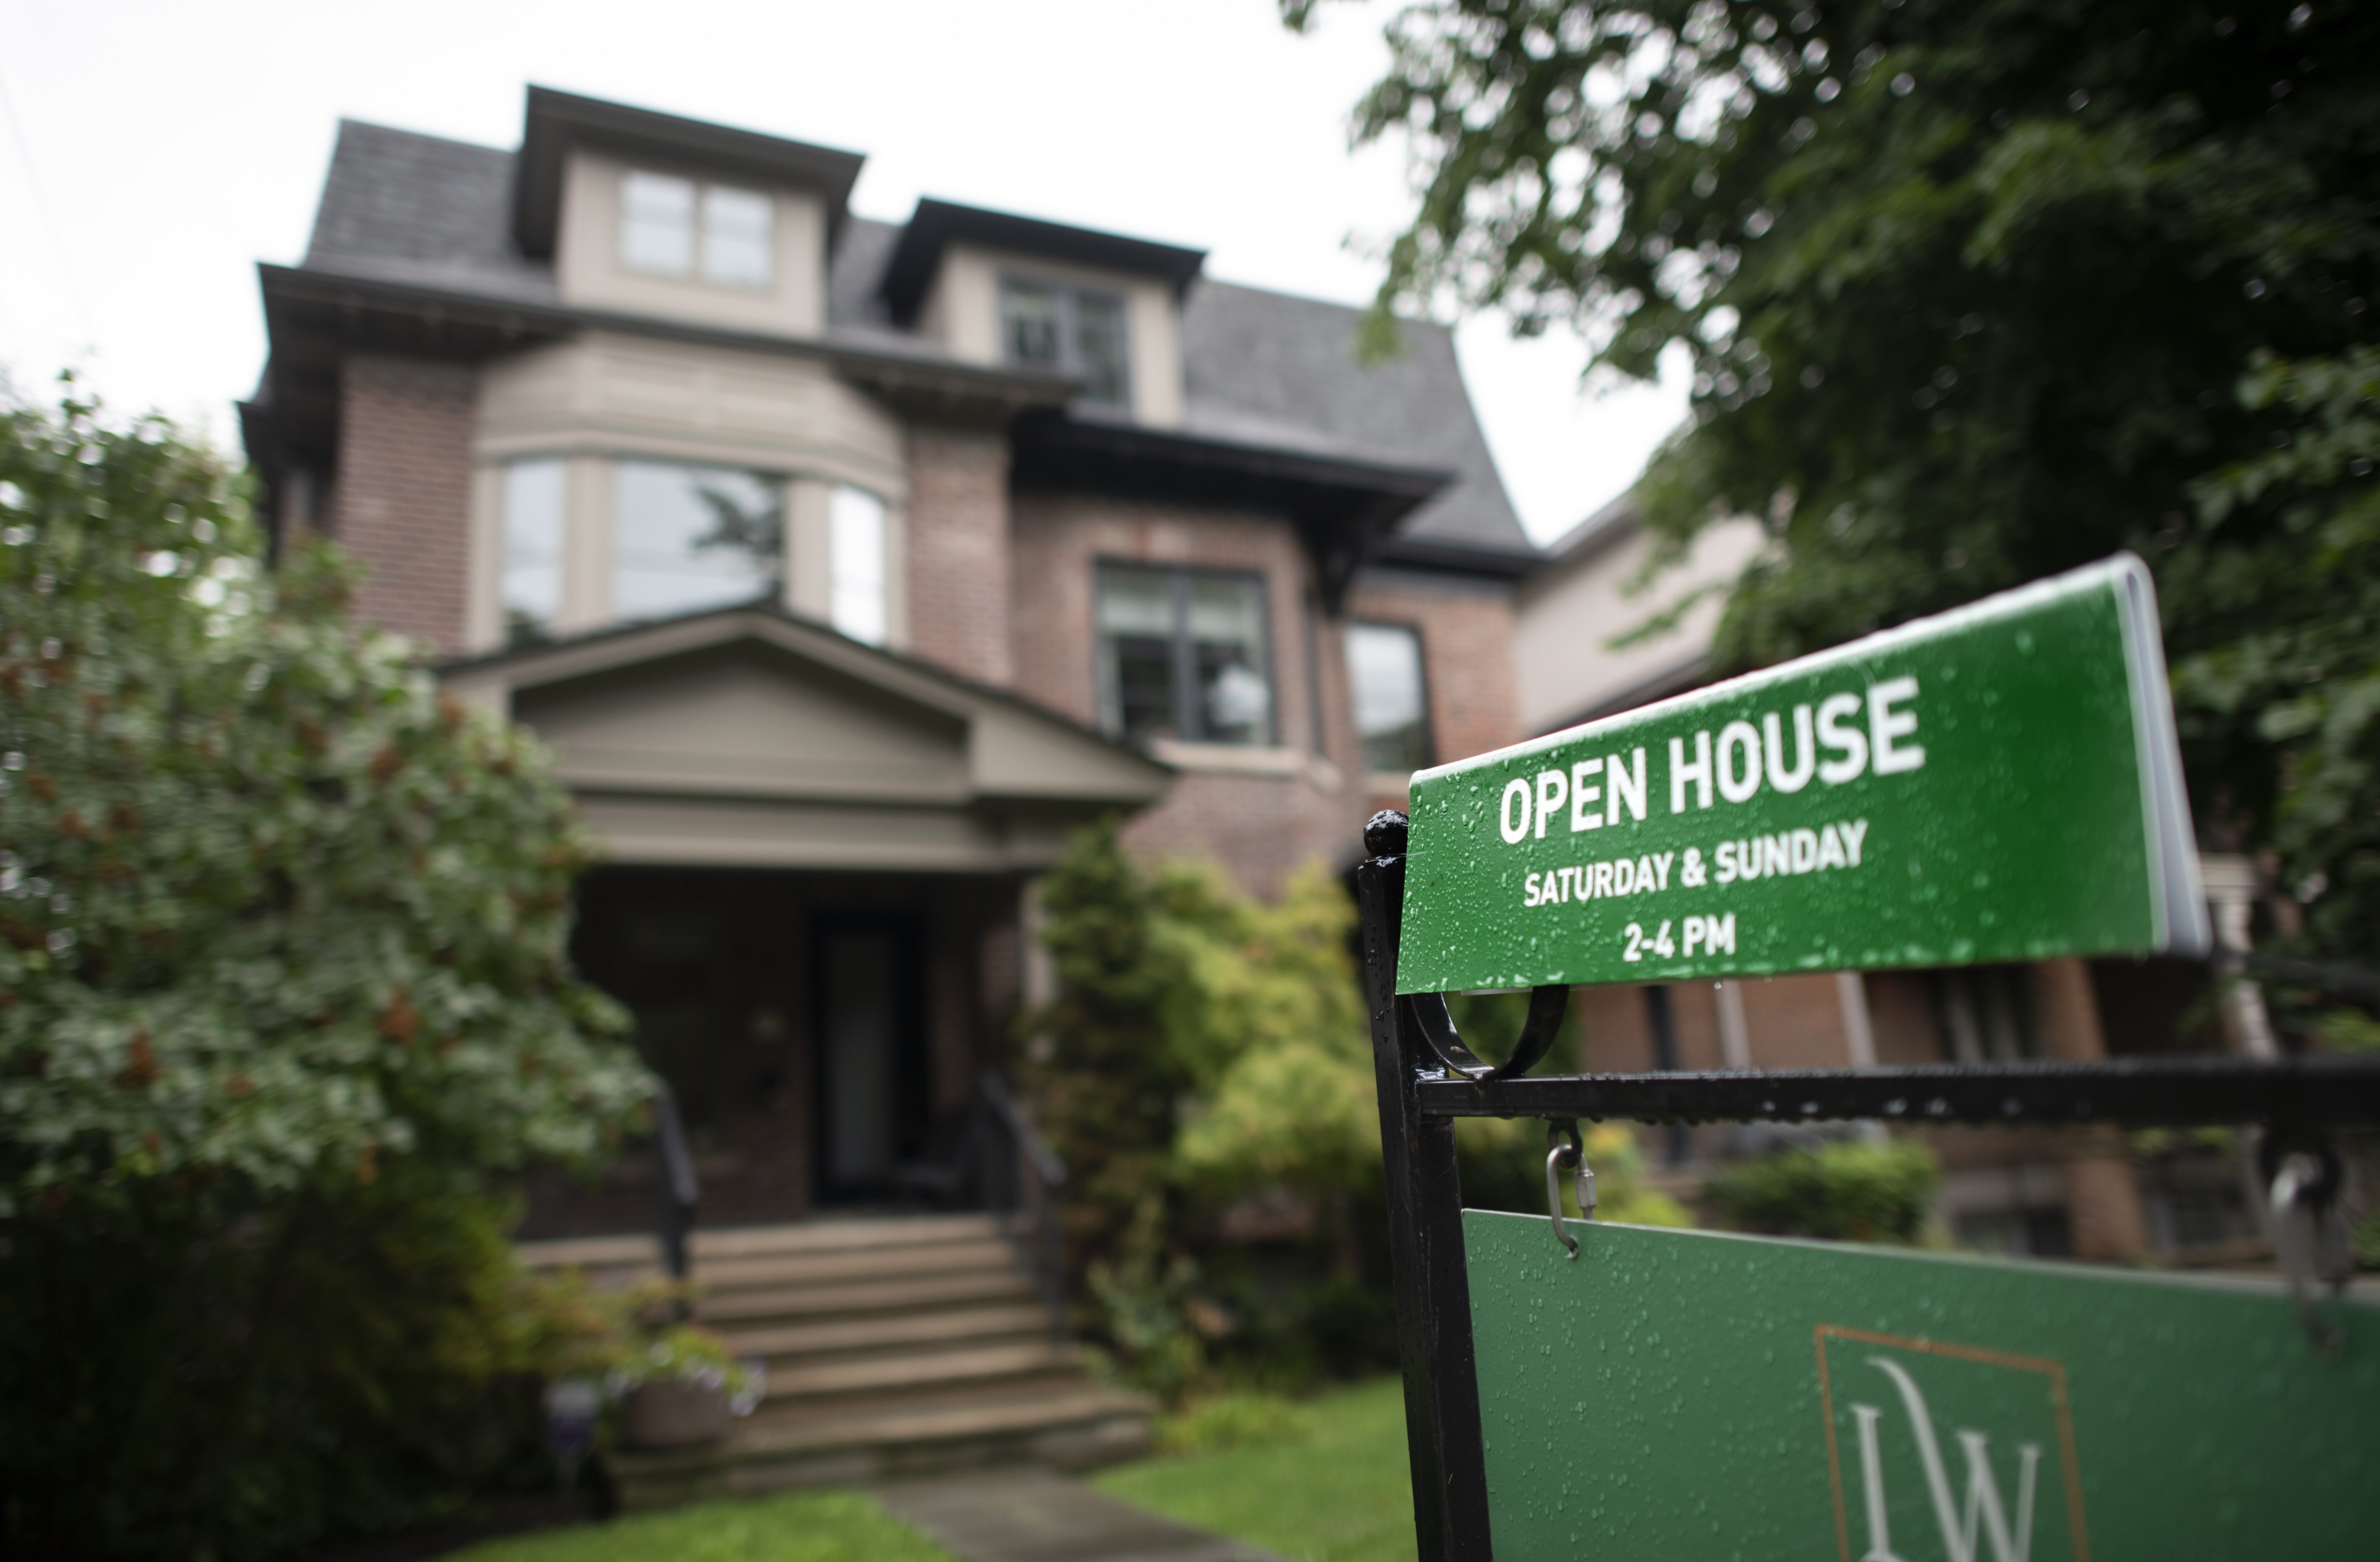 Trudeau wants to maintain home prices while pushing affordability. Is it possible?